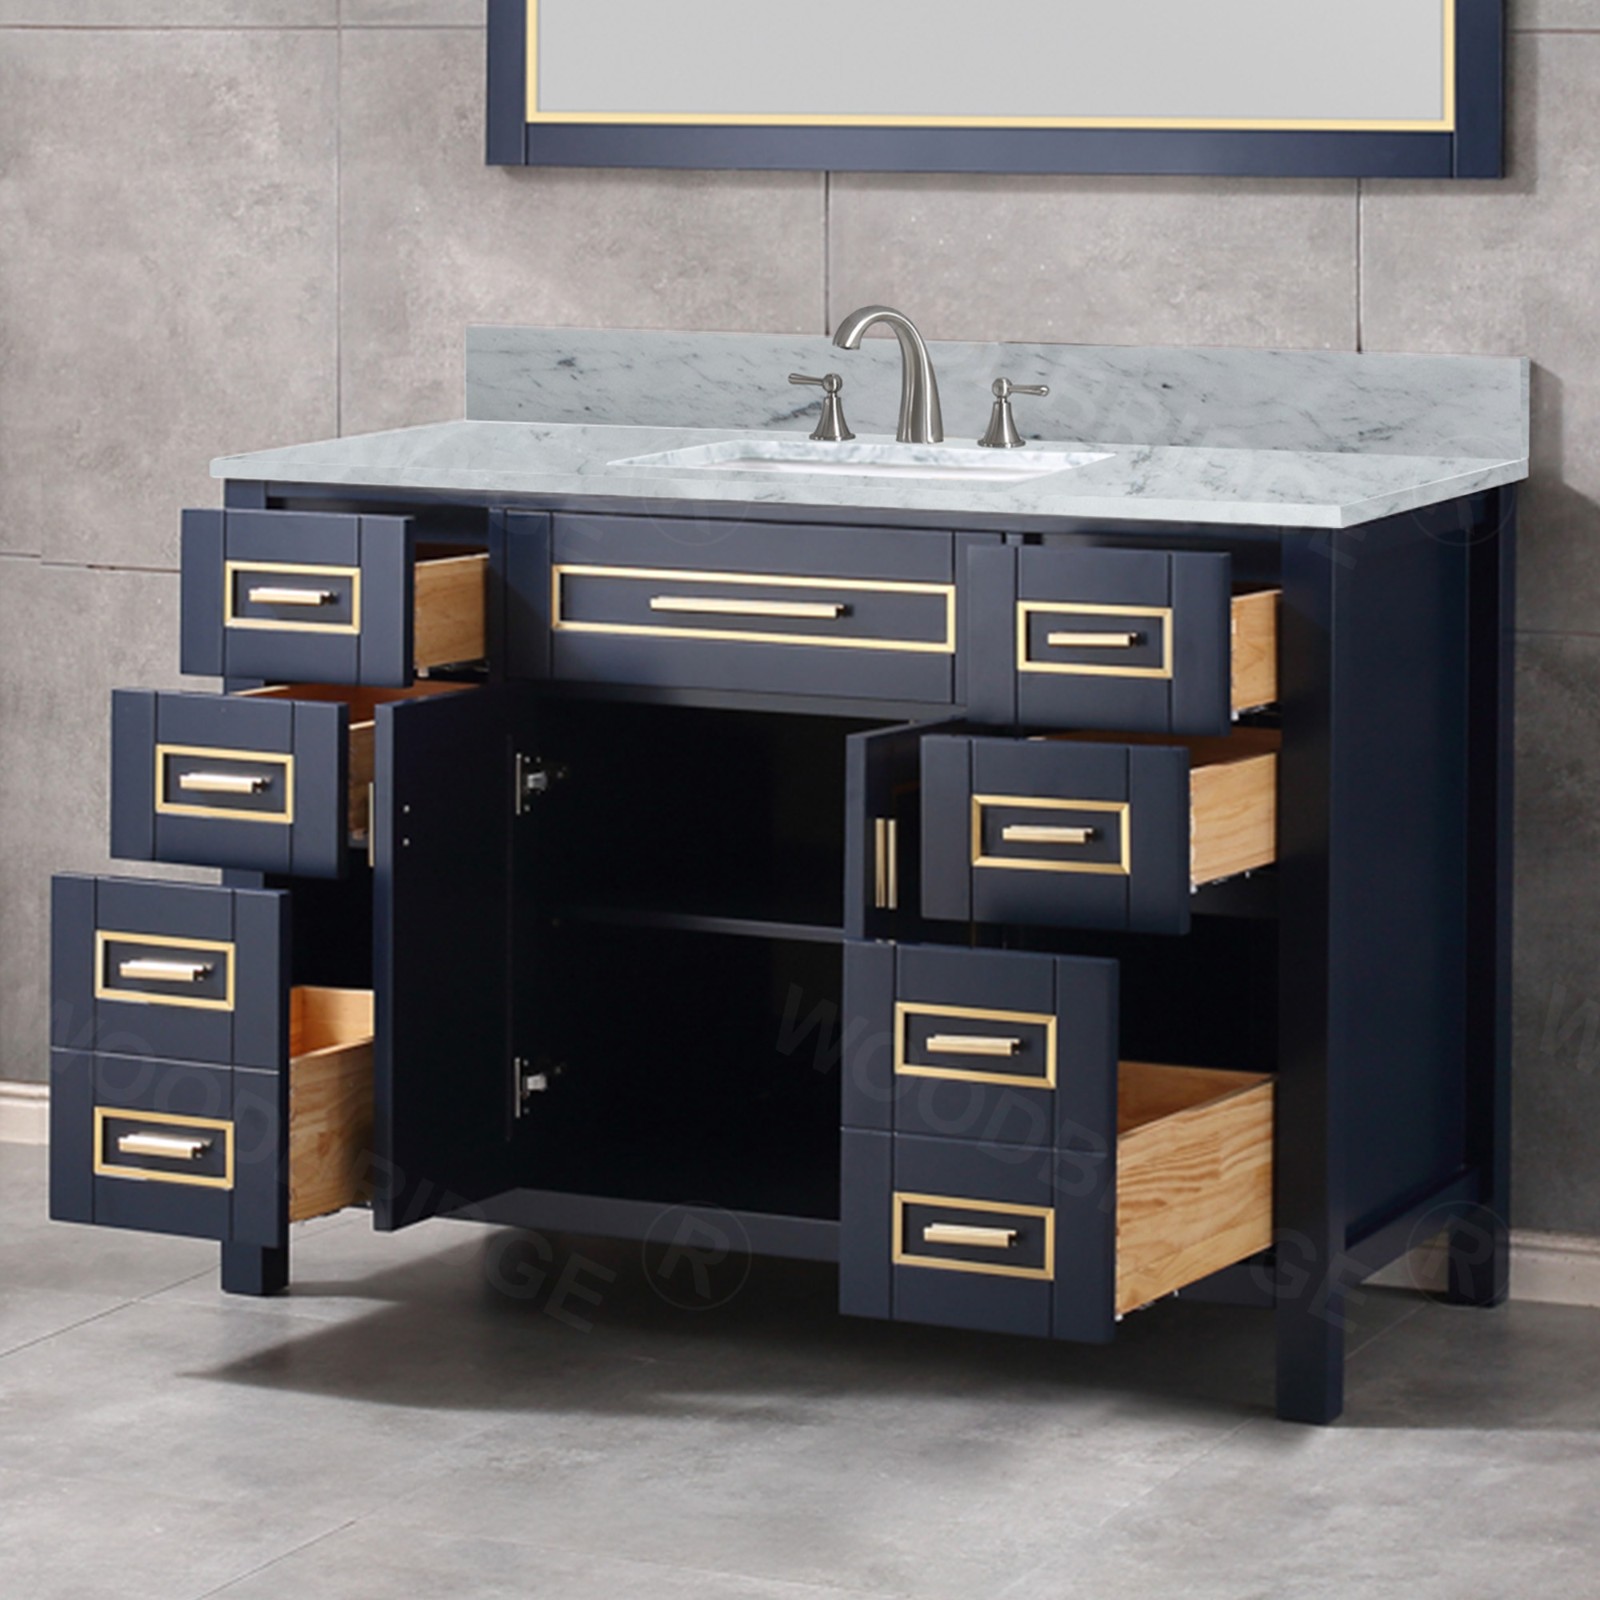  WOODBRIDGE Milan  49” Floor Mounted Single Basin Vanity Set with Solid Wood Cabinet in Navy Blue, and Carrara White Marble Vanity Top with Pre-installed Undermount Rectangle Bathroom Sink in White, Pre-Drilled 3-Hole for 4-inch Centerset Faucet_4740